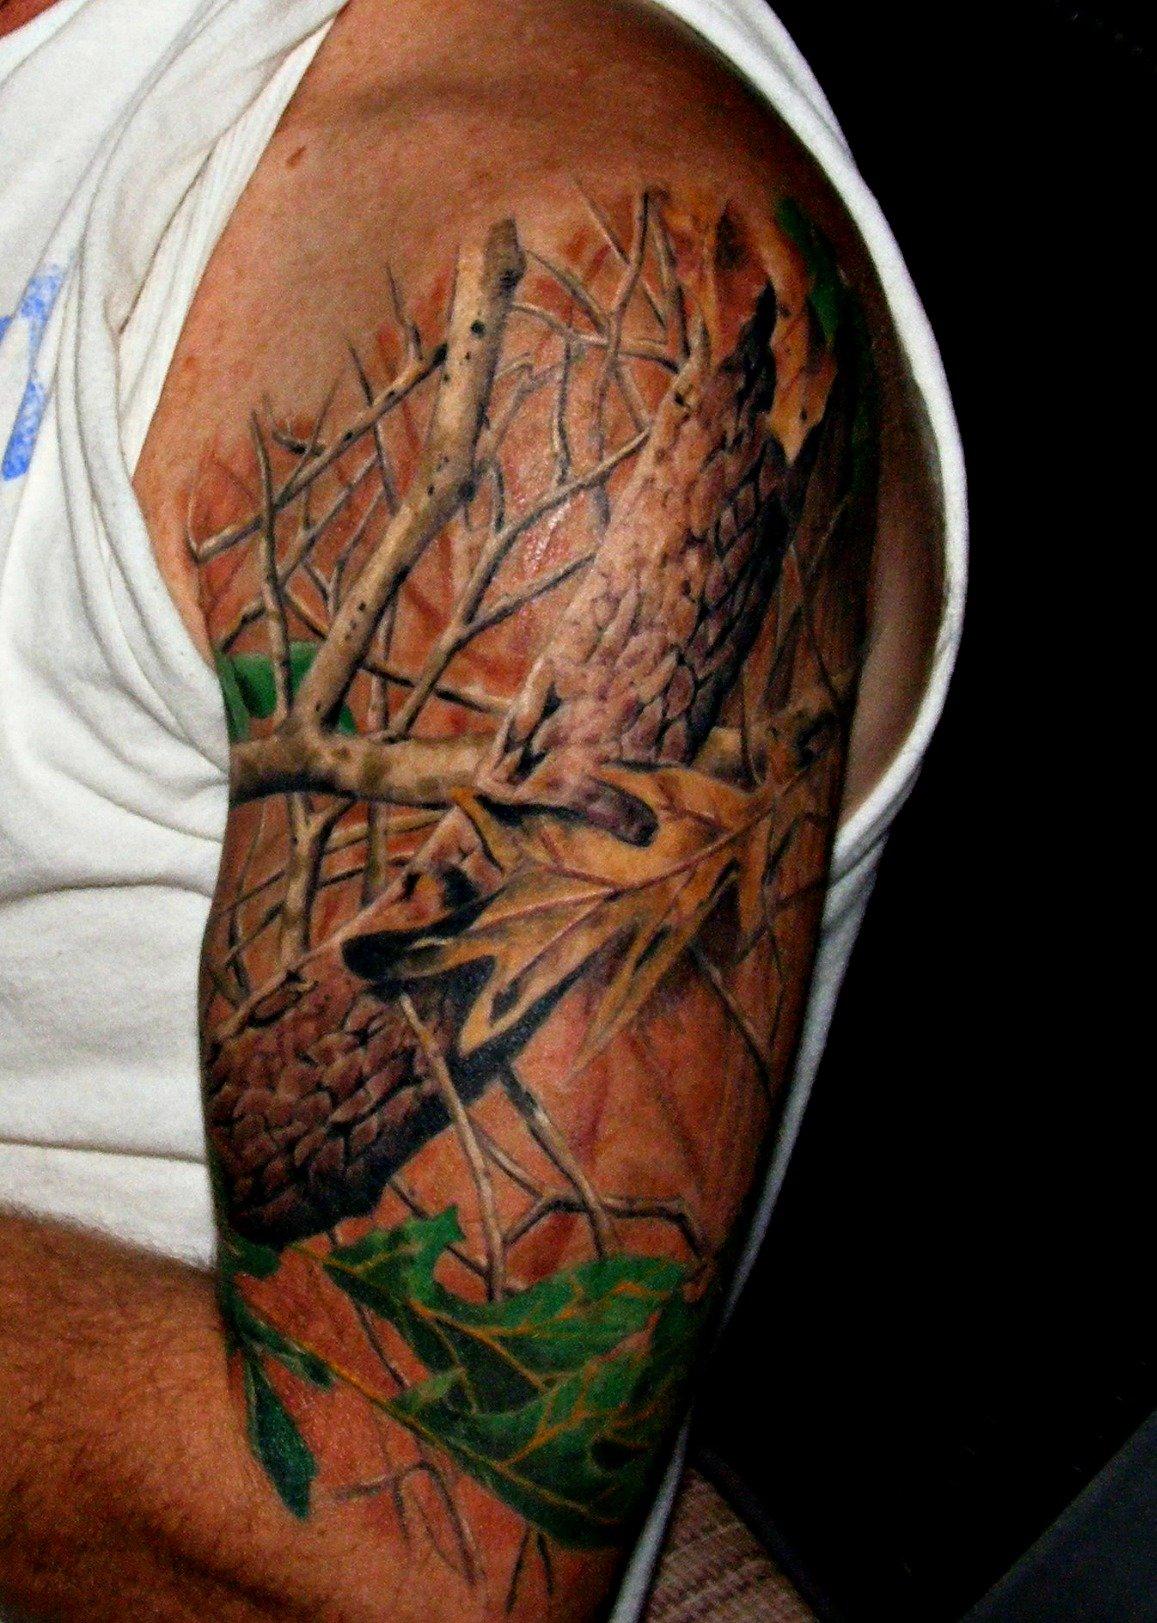 Steve Jackson won the 2012 Realtree Hunting Tattoo Contest with this killer Realtree Hardwoods HD Green half sleeve.